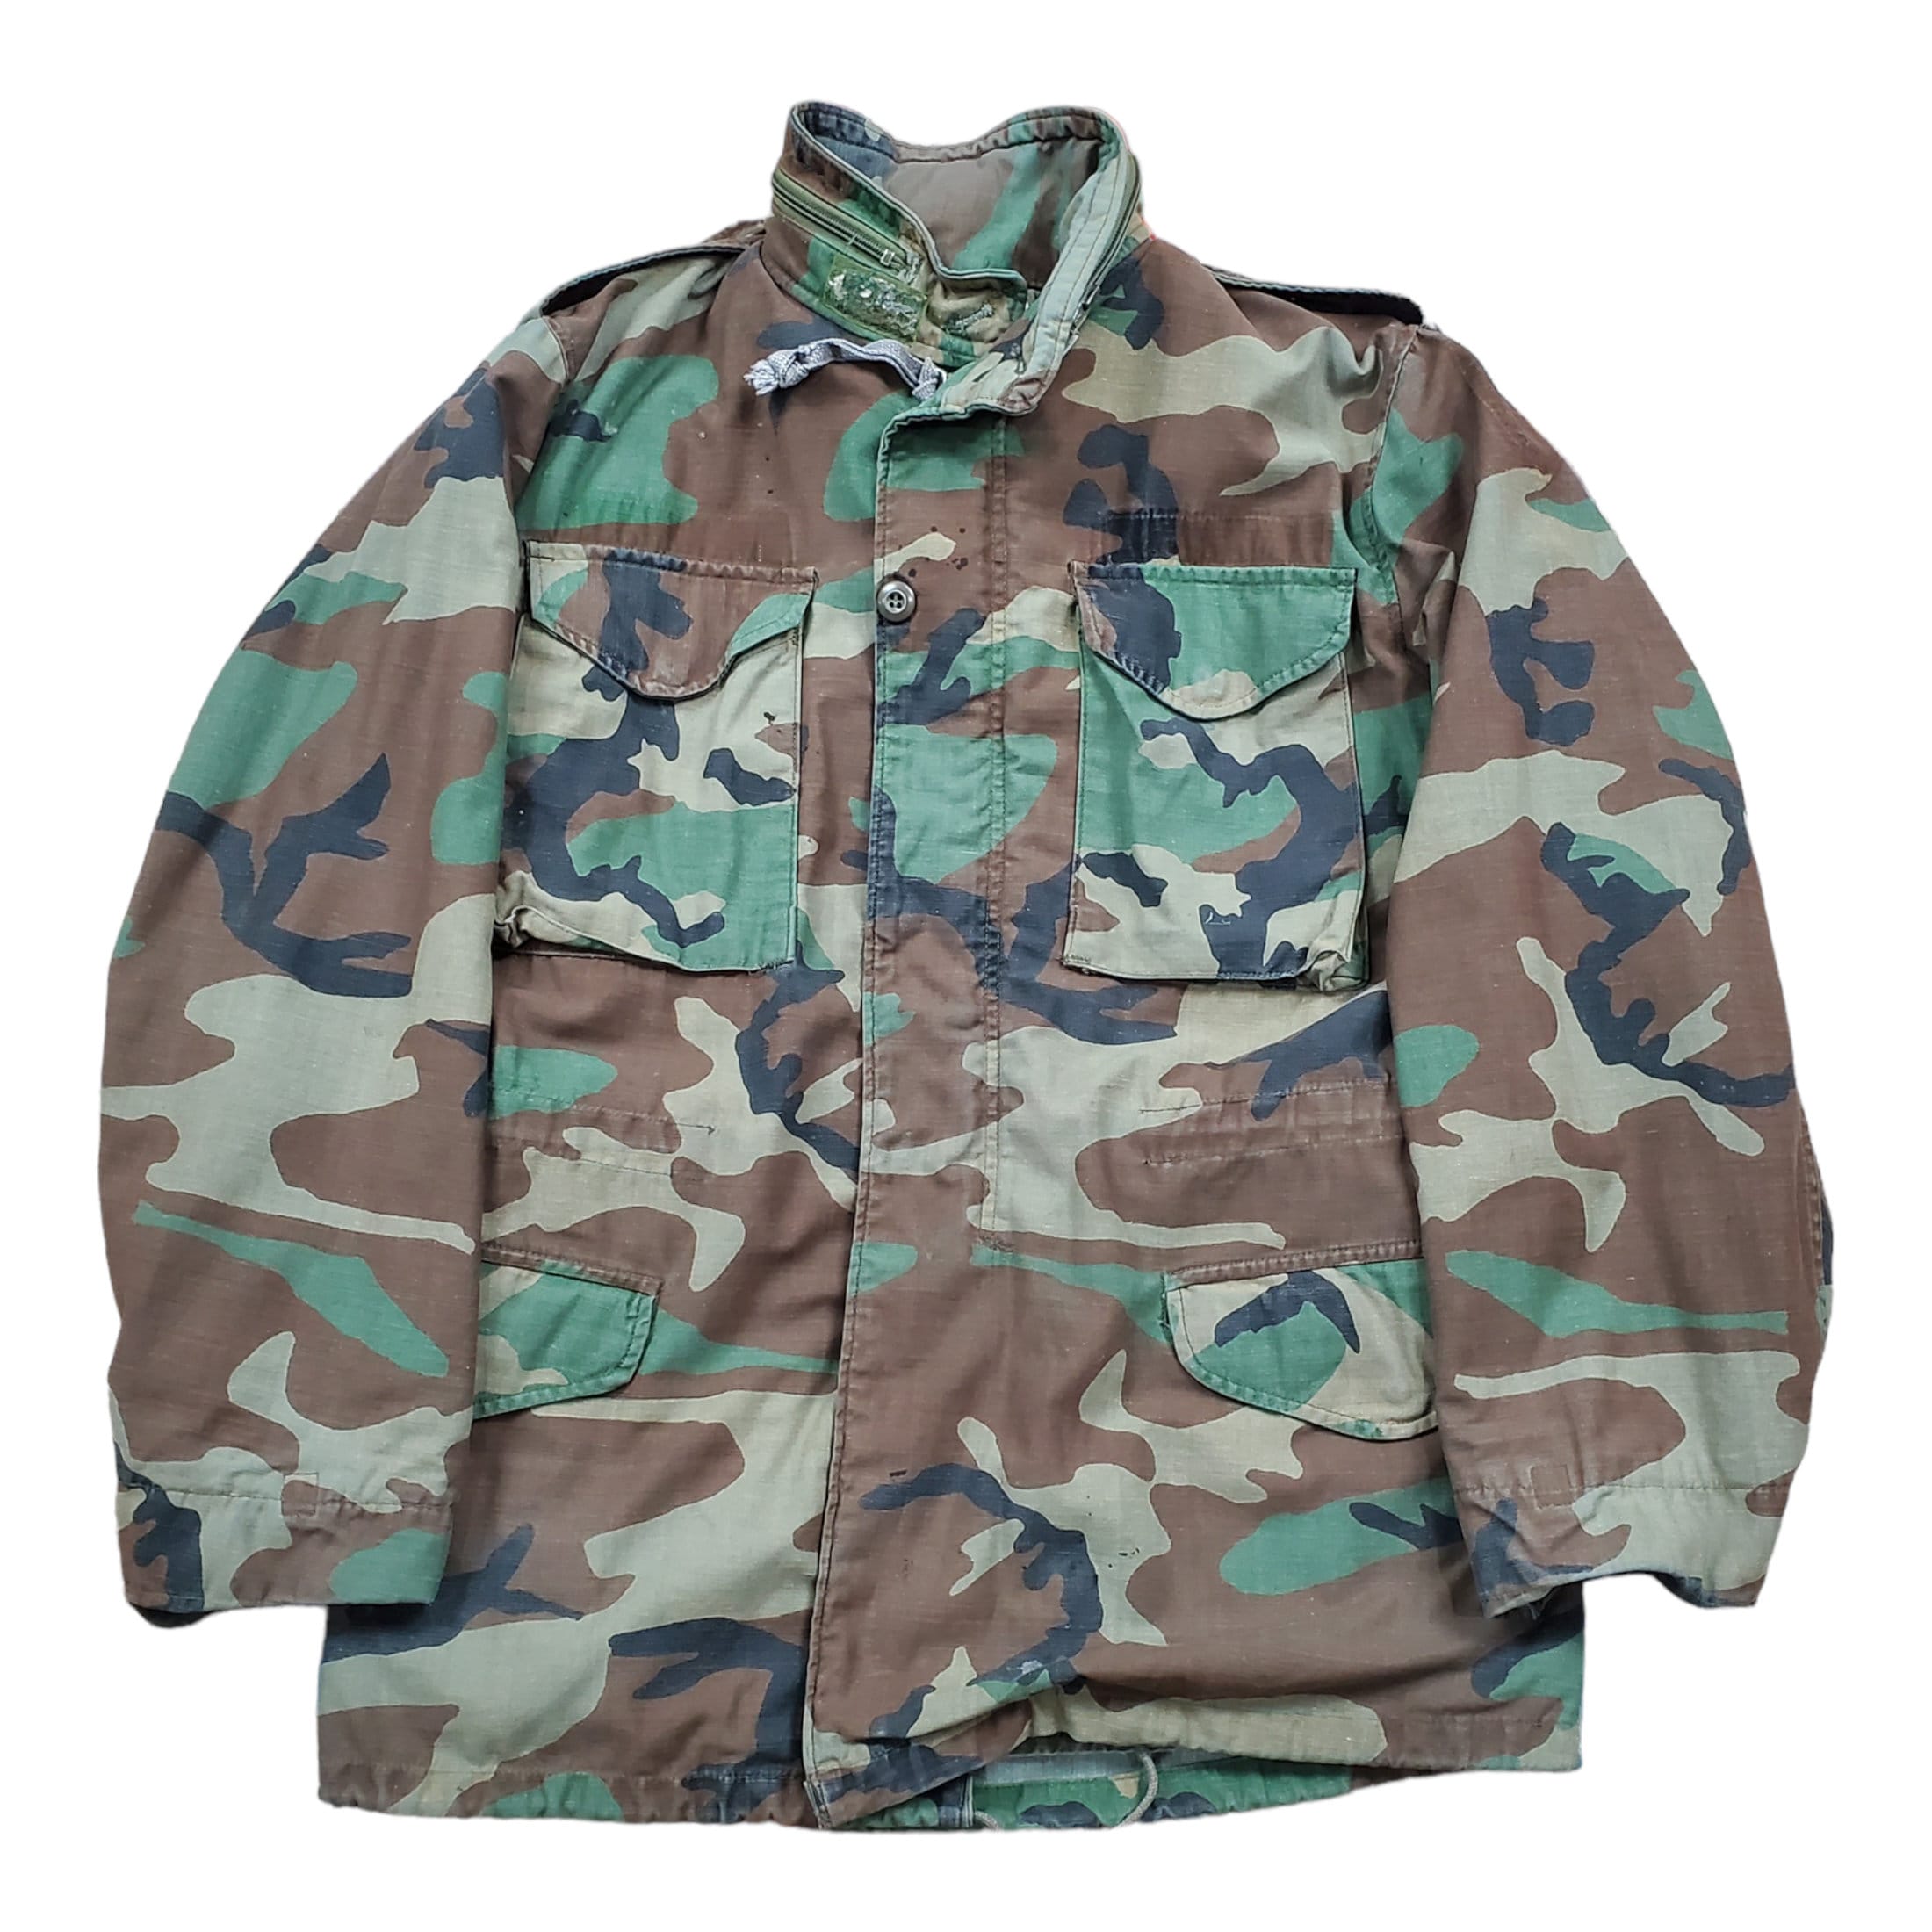 Hunting/Military Jackets – People's Champ Vintage